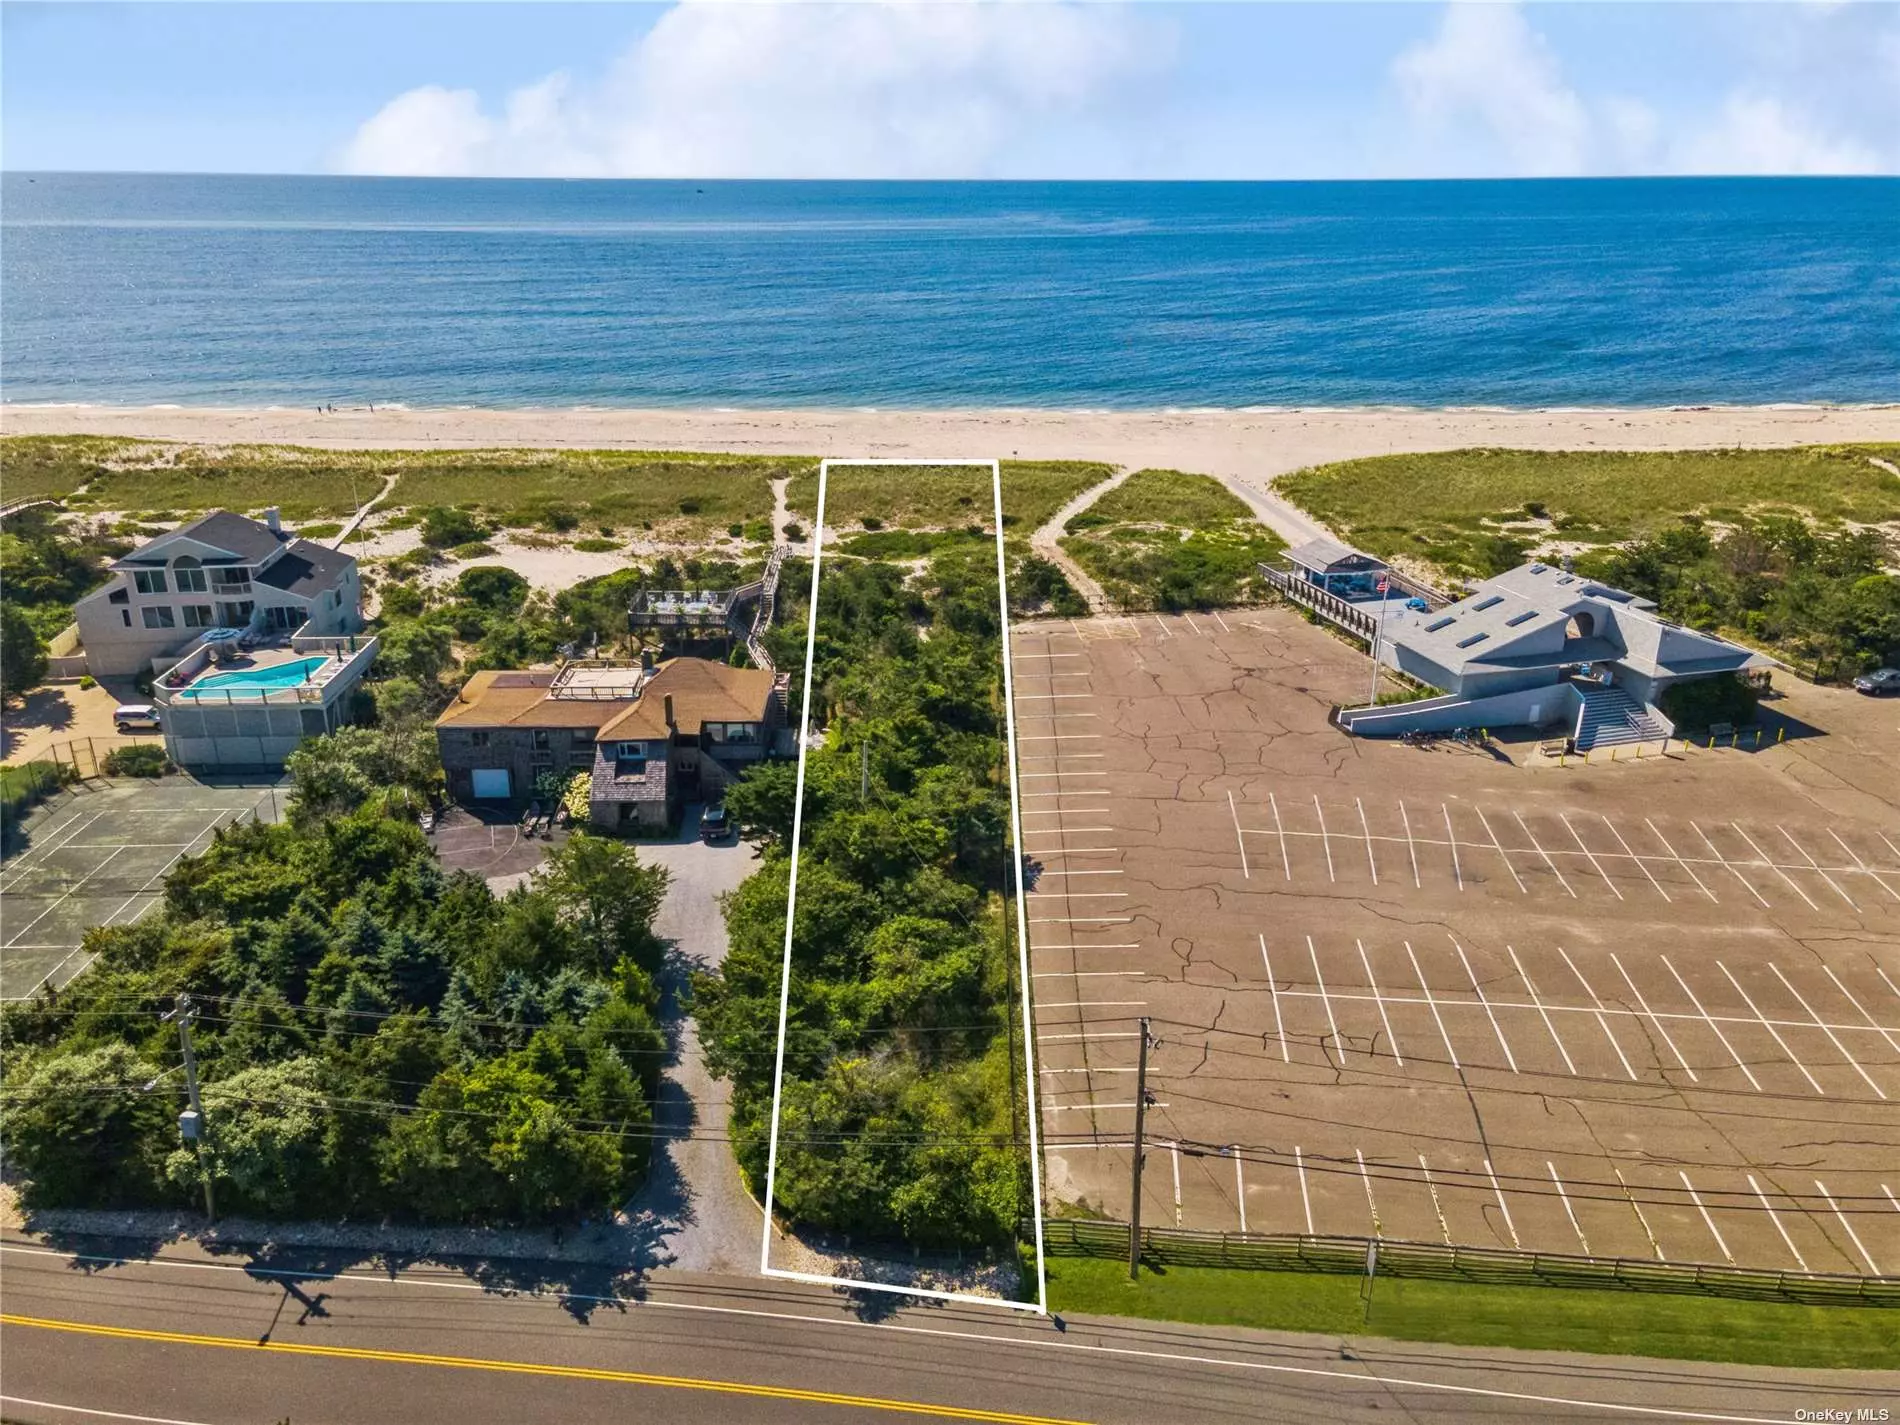 Property is being sold as-is while the process for permissions to build proceeds. Here is your opportunity to acquire one of the last oceanfront parcels on Dune Road with an unobstructed view. 95 Dune Road is also the closest available oceanfront property to Westhampton Beach Main Street shops and restaurants.